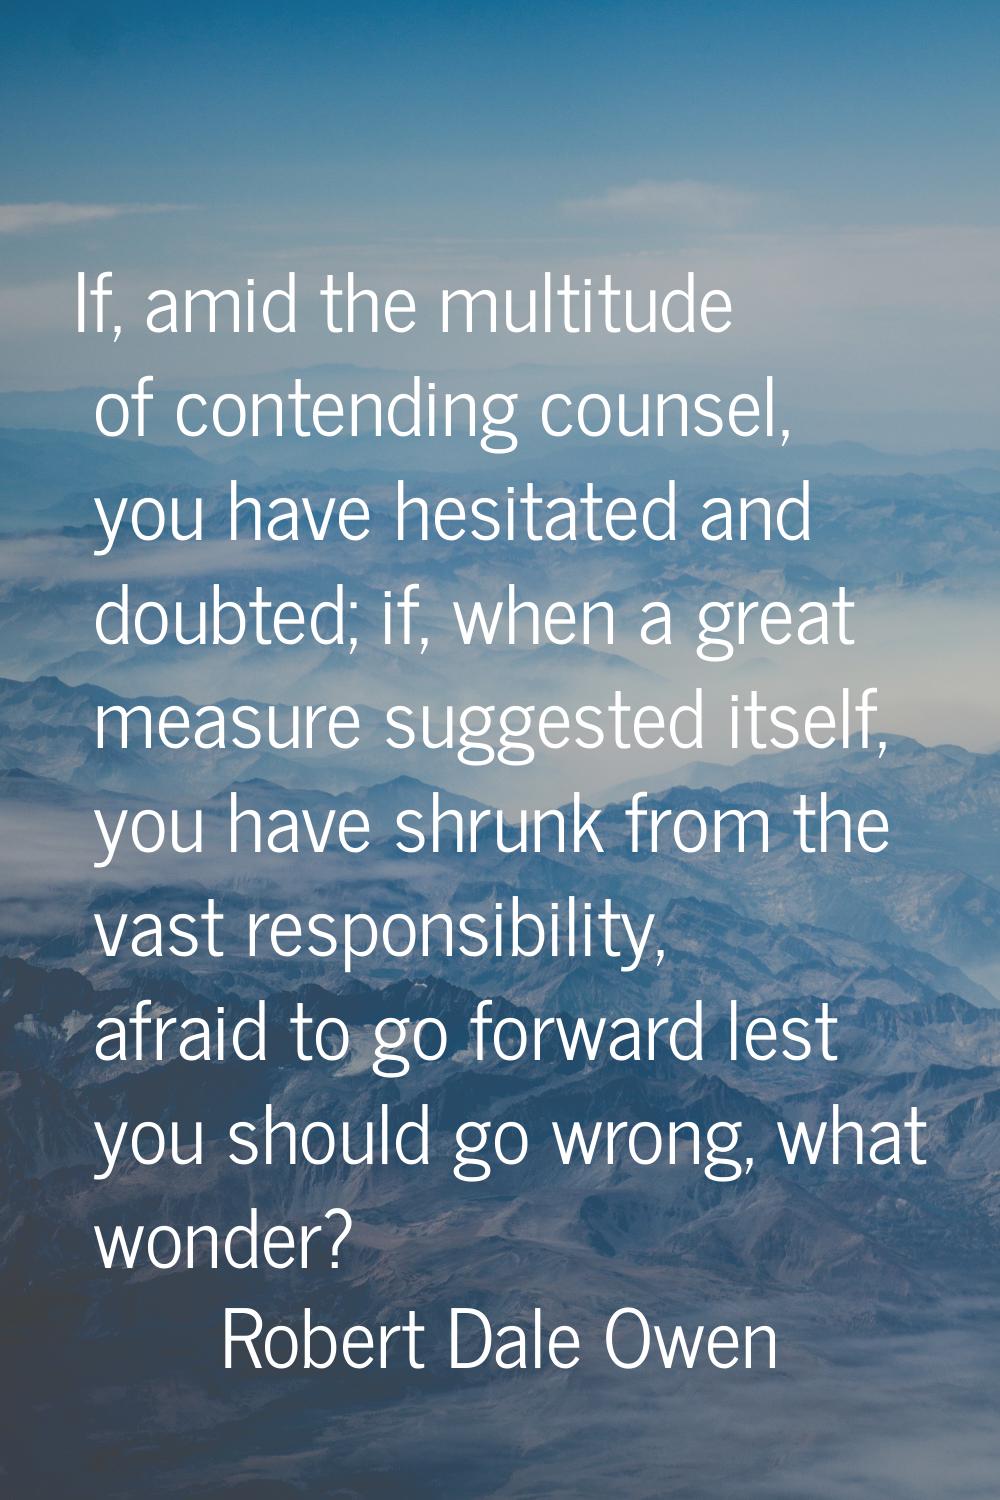 If, amid the multitude of contending counsel, you have hesitated and doubted; if, when a great meas